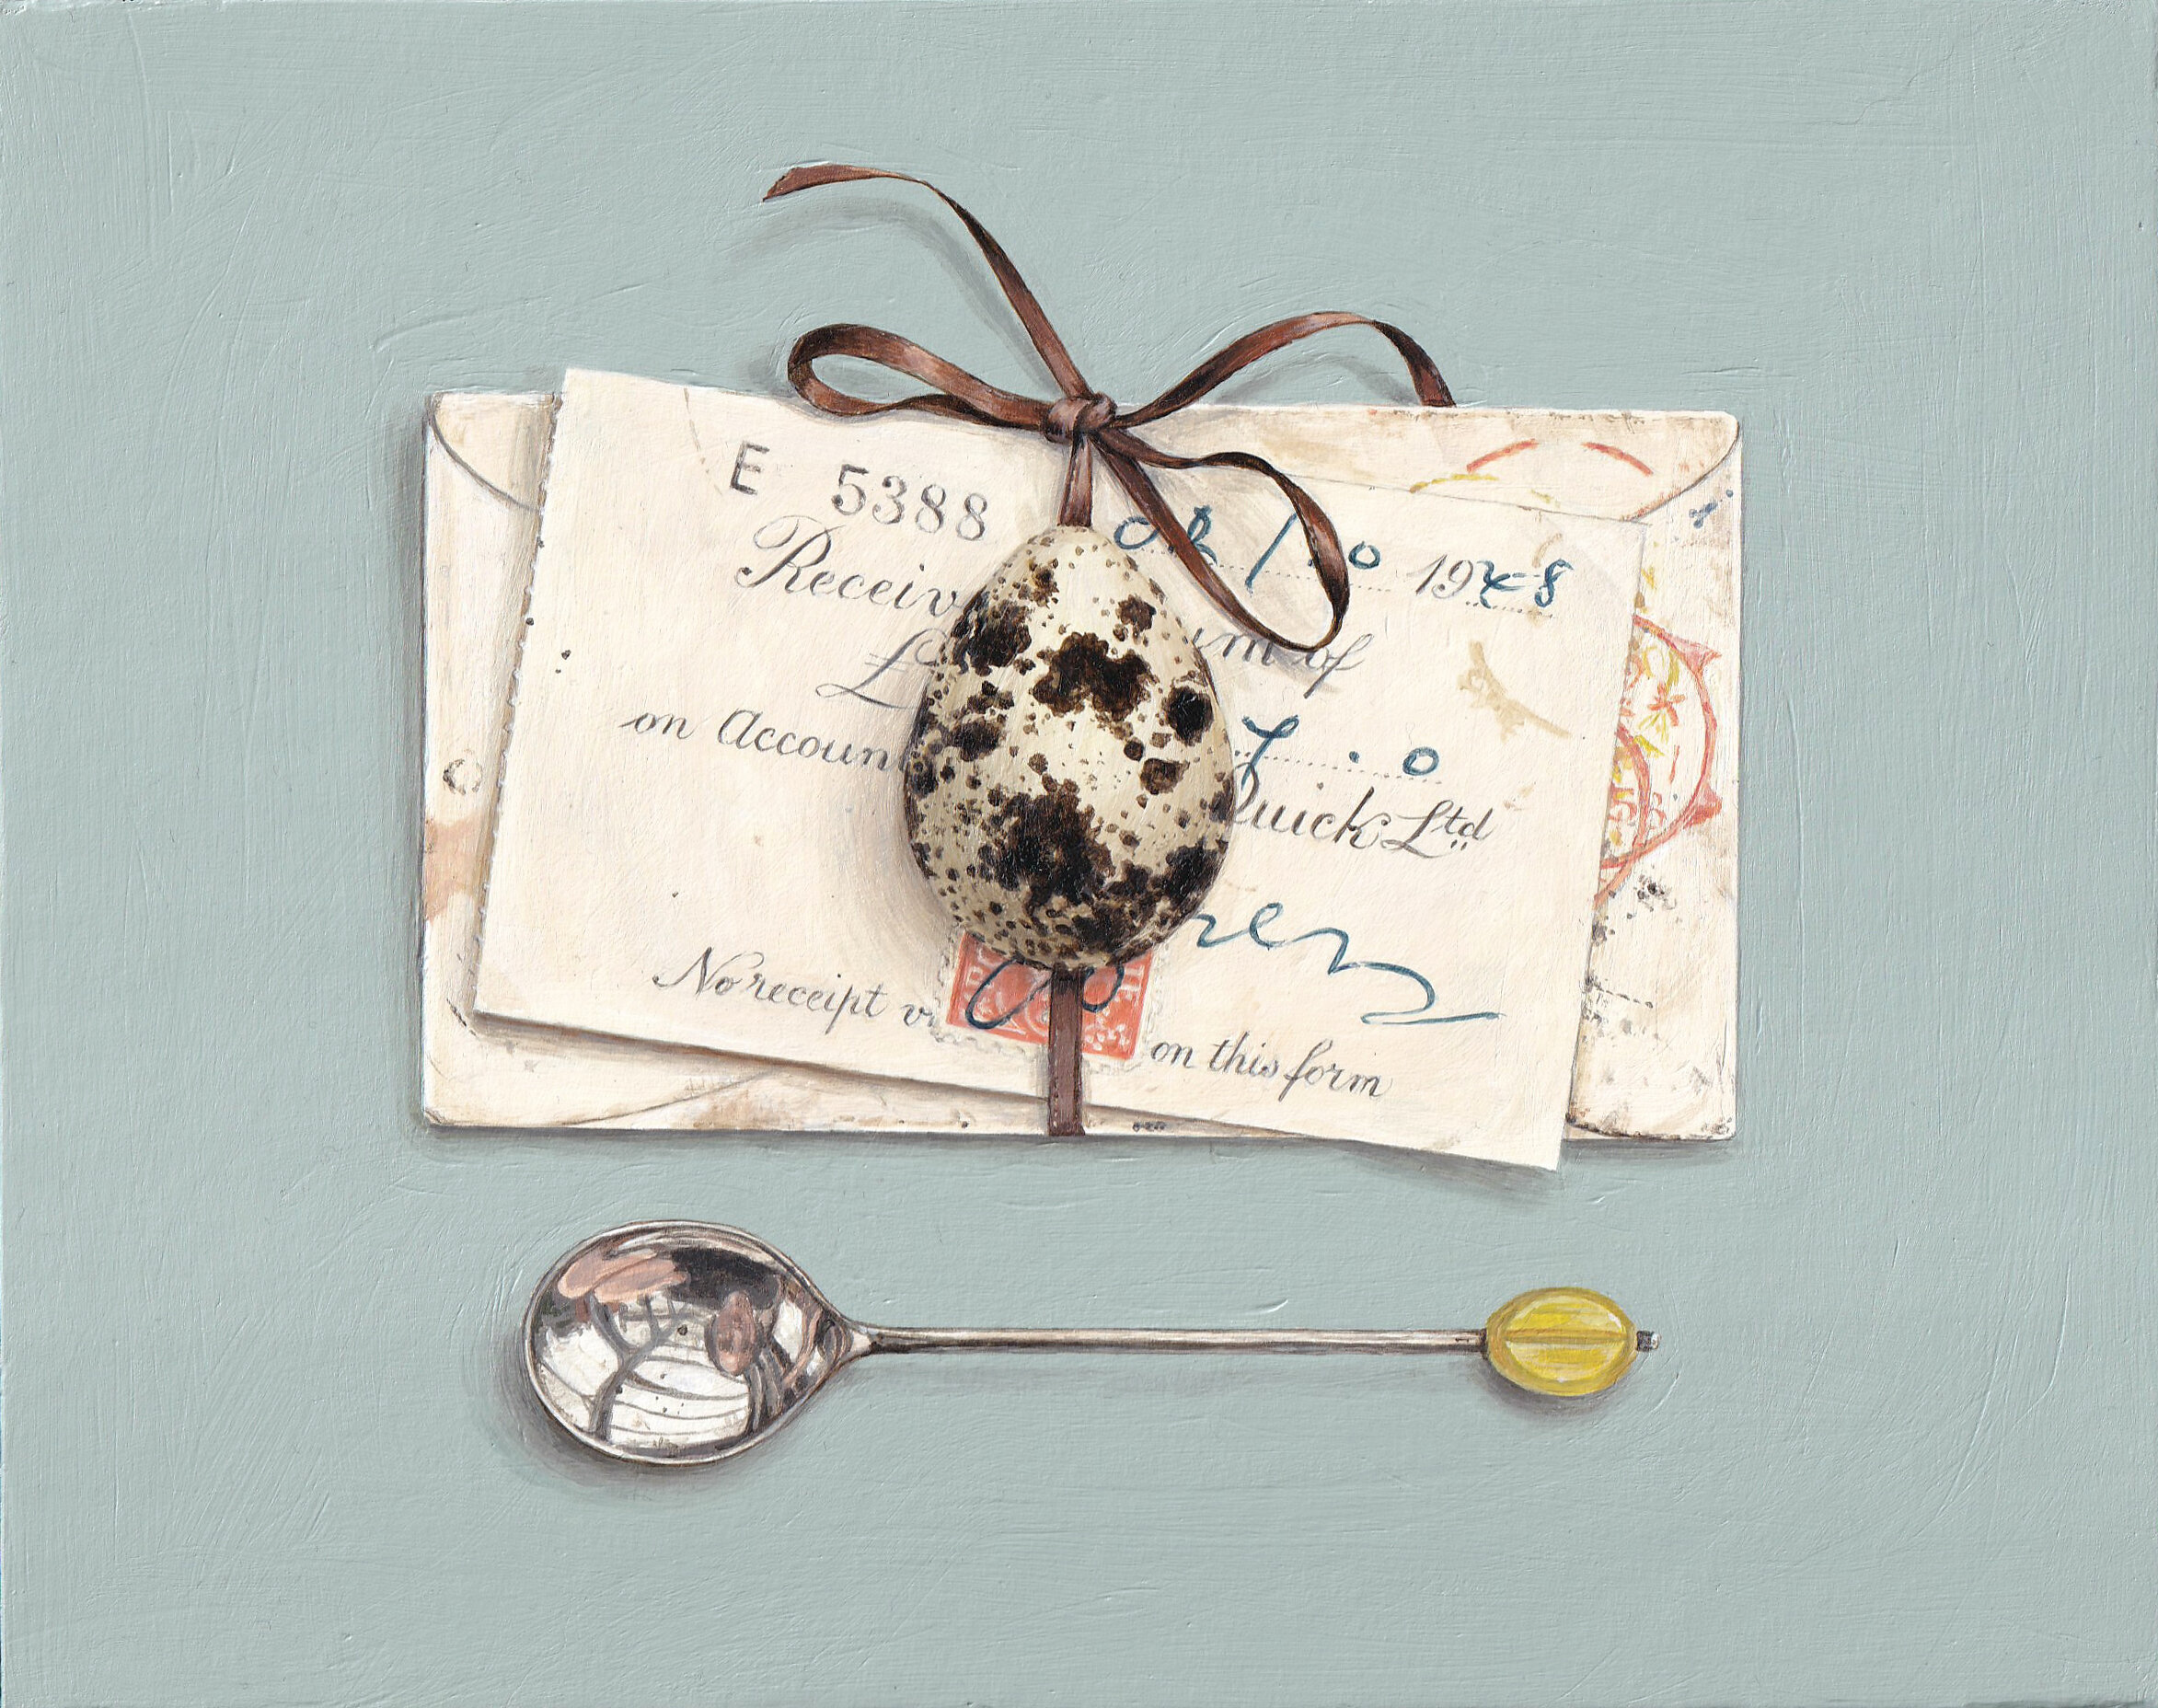   receipt with quail’s egg and ribbon   acrylic on board 16x20cm  2020 